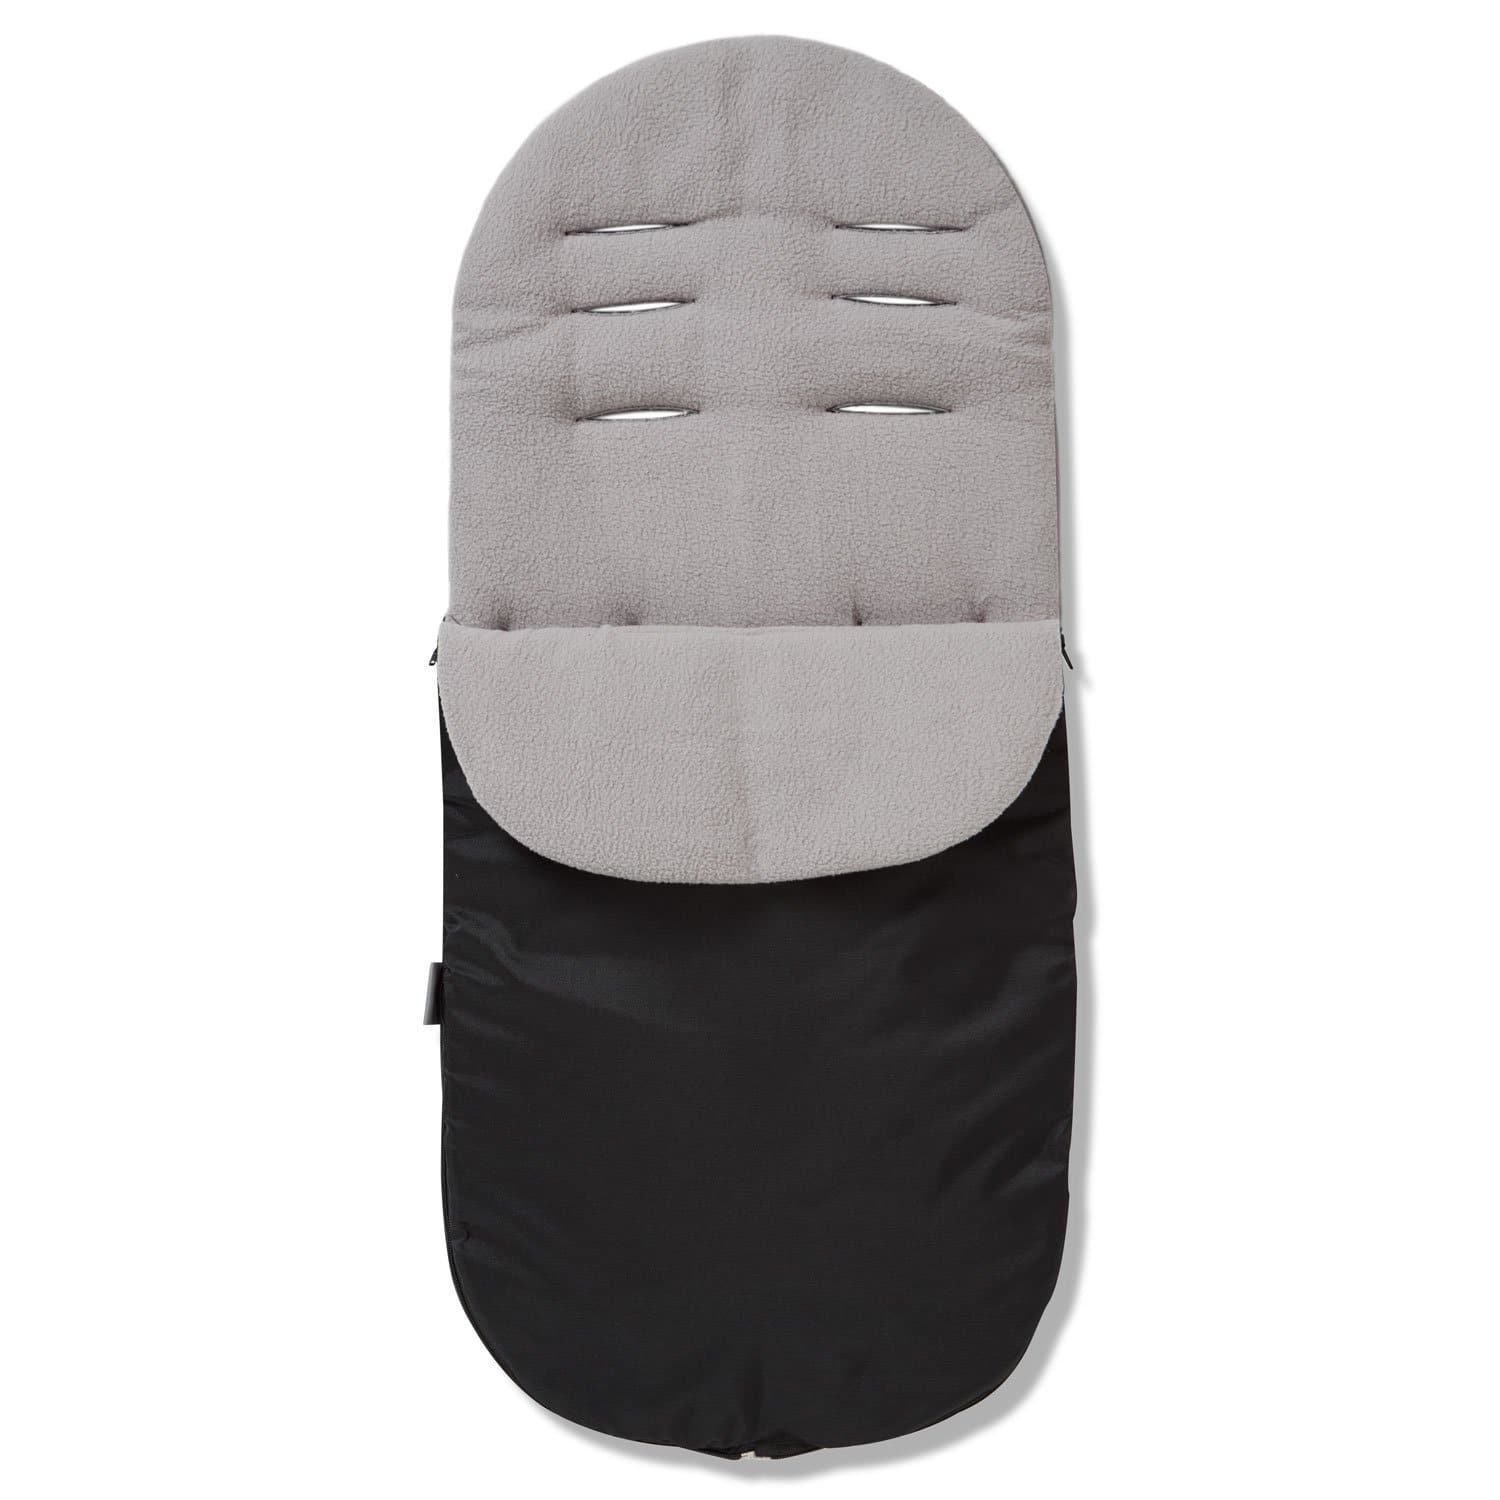 Footmuff / Cosy Toes Compatible with Bebecar - Grey / Fits All Models | For Your Little One